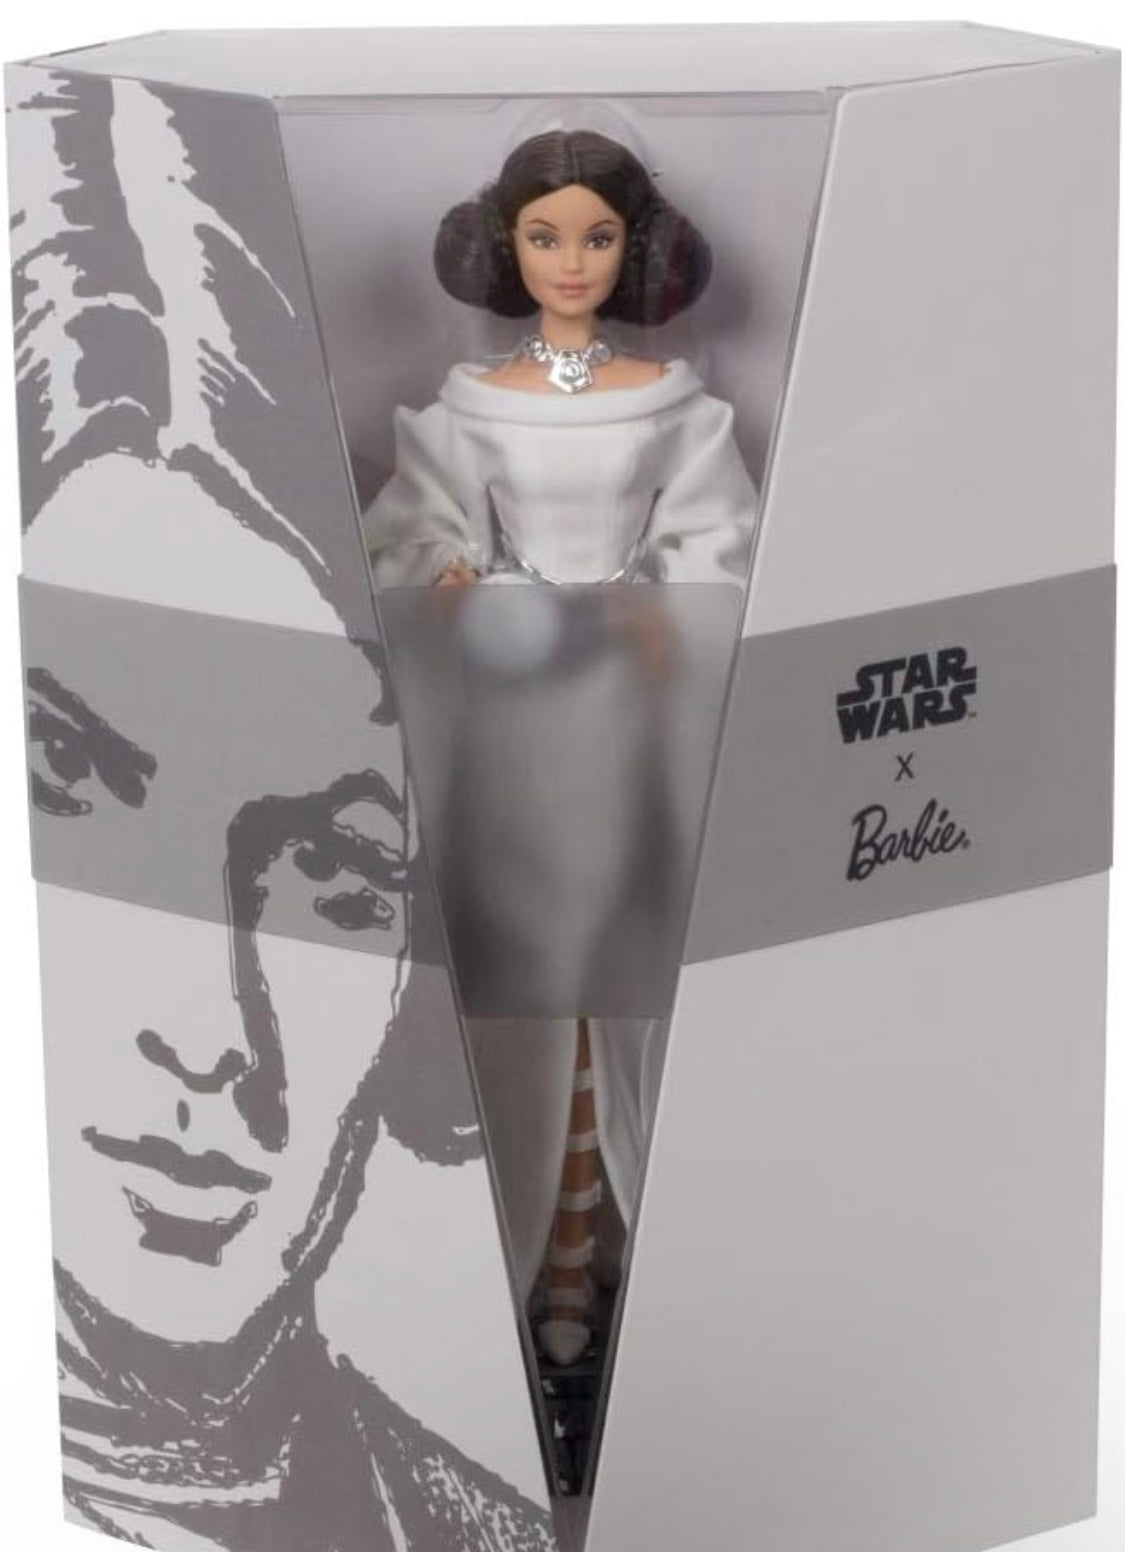 Barbie Collector Star Wars Princess Leia Barbie Doll, in White Gown and Accessories, with Doll Stand and Certificate of Authenticity